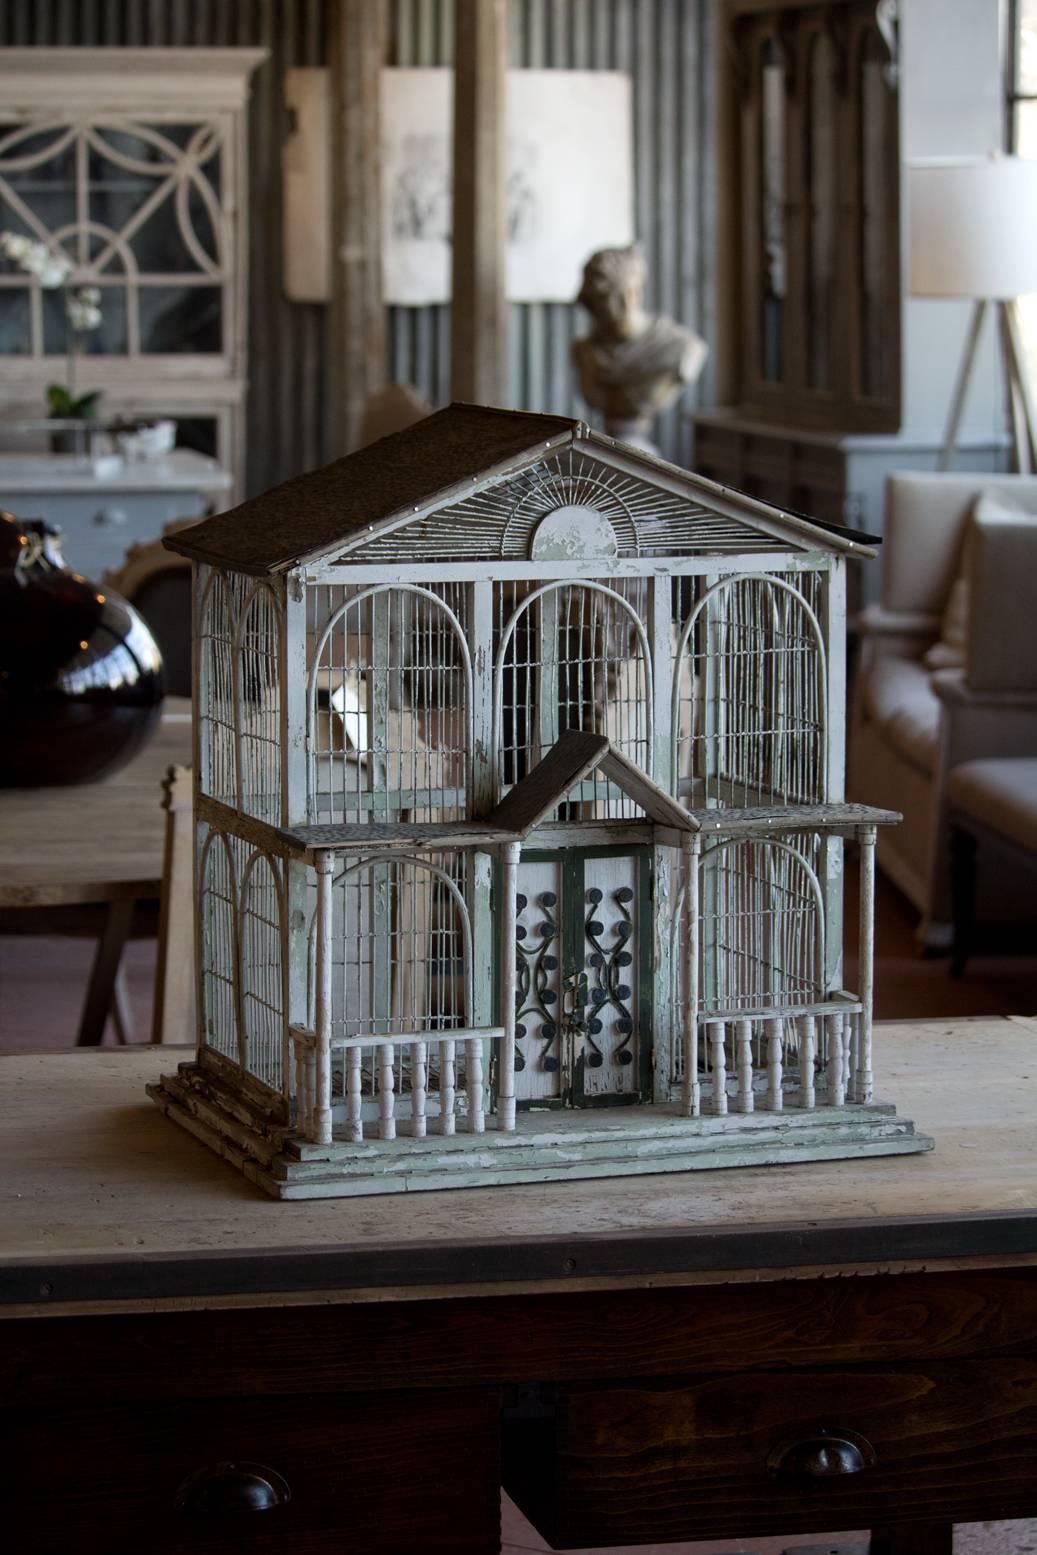 Folksy American vintage bird cage in the Gothic Revival style with porch and decorative door. It has lots of character and chippy paint.